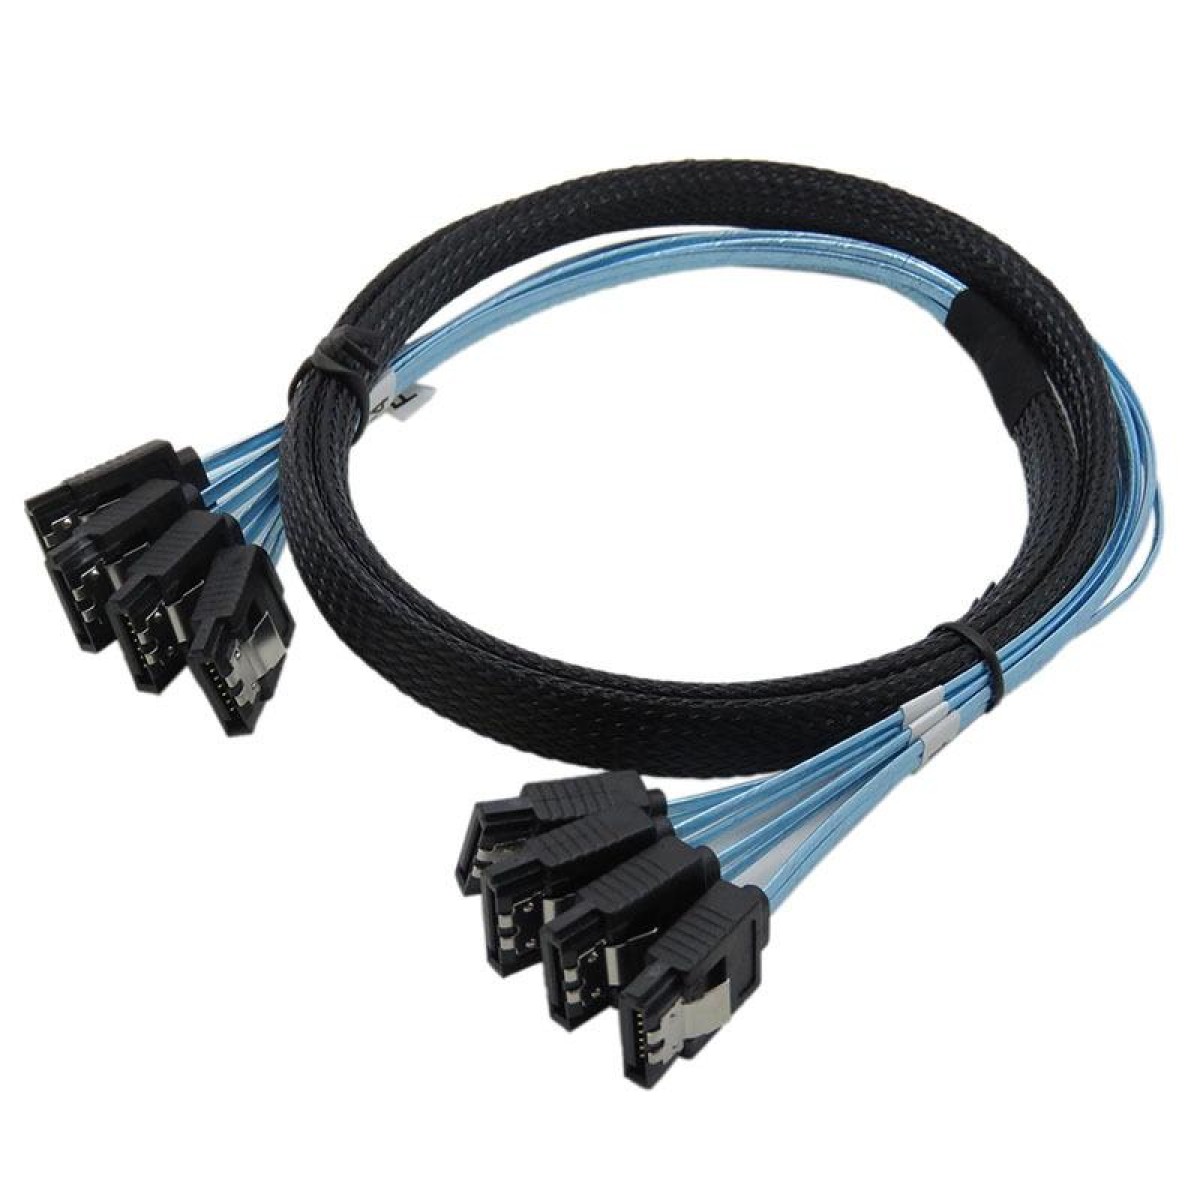 Mini SAS to SATA Data Cable With Braided Net Computer Case Hard Drive Cable,specification: 4SATA-0.5m